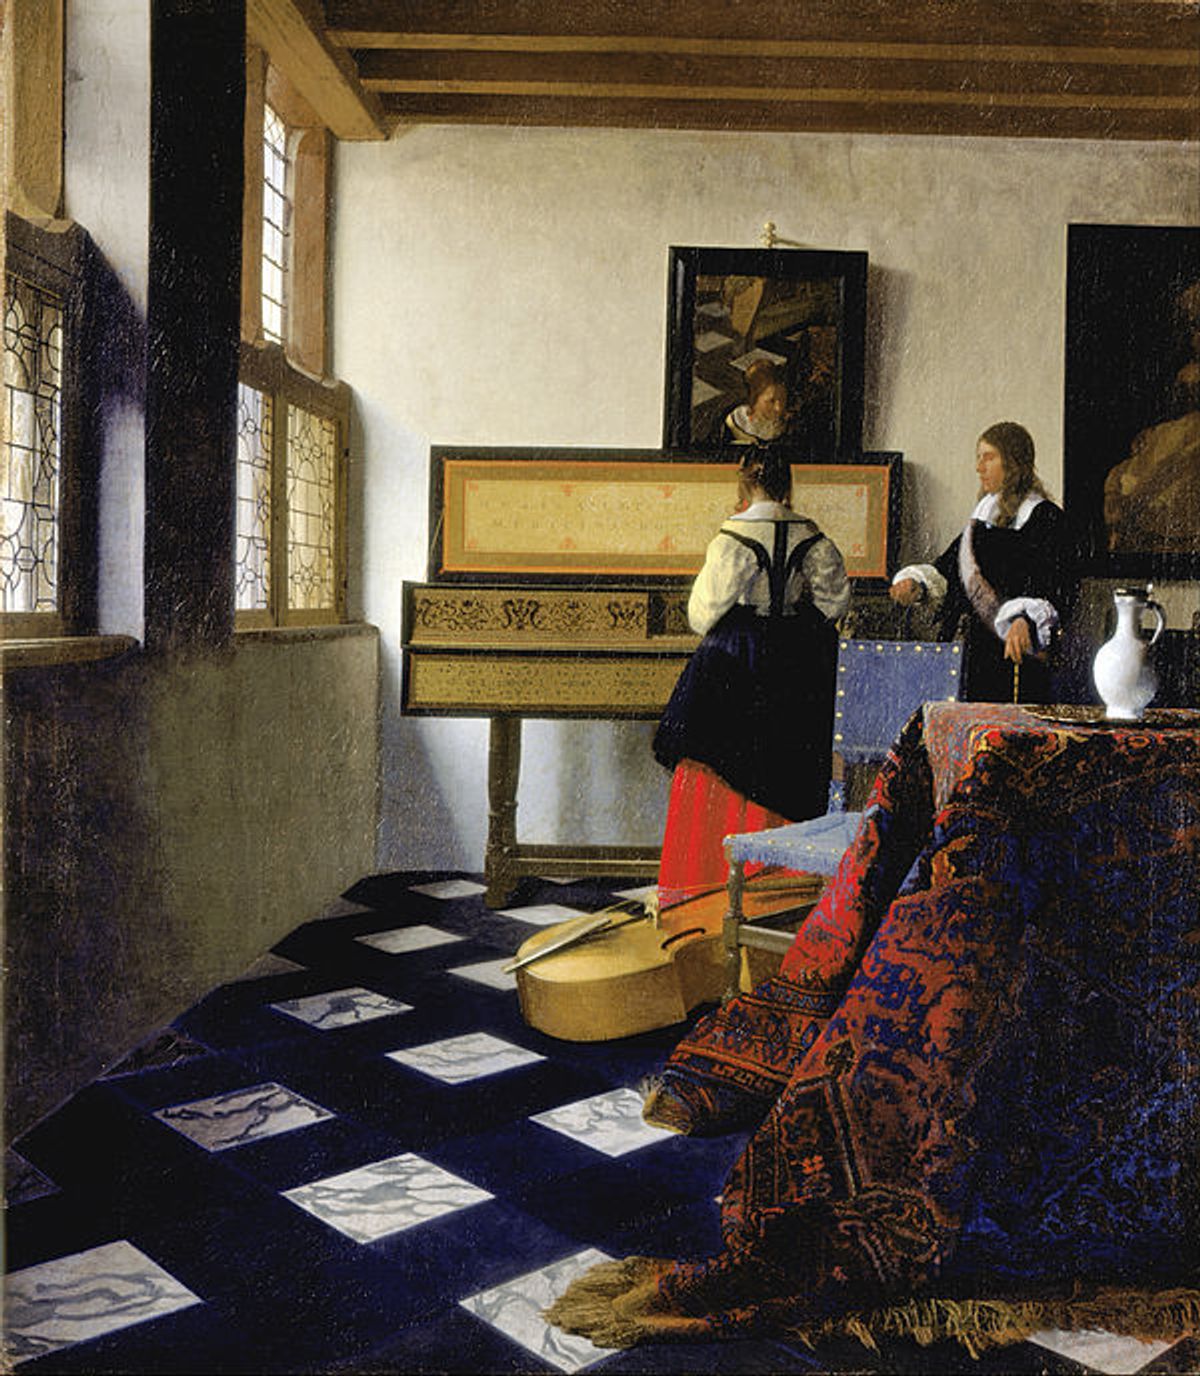 Johannes Vermeer's The Music Lesson (1662–65) is one of 65 works from the Royal Collection to feature in an upcoming exhibition at the Queen's Gallery The Royal Collection